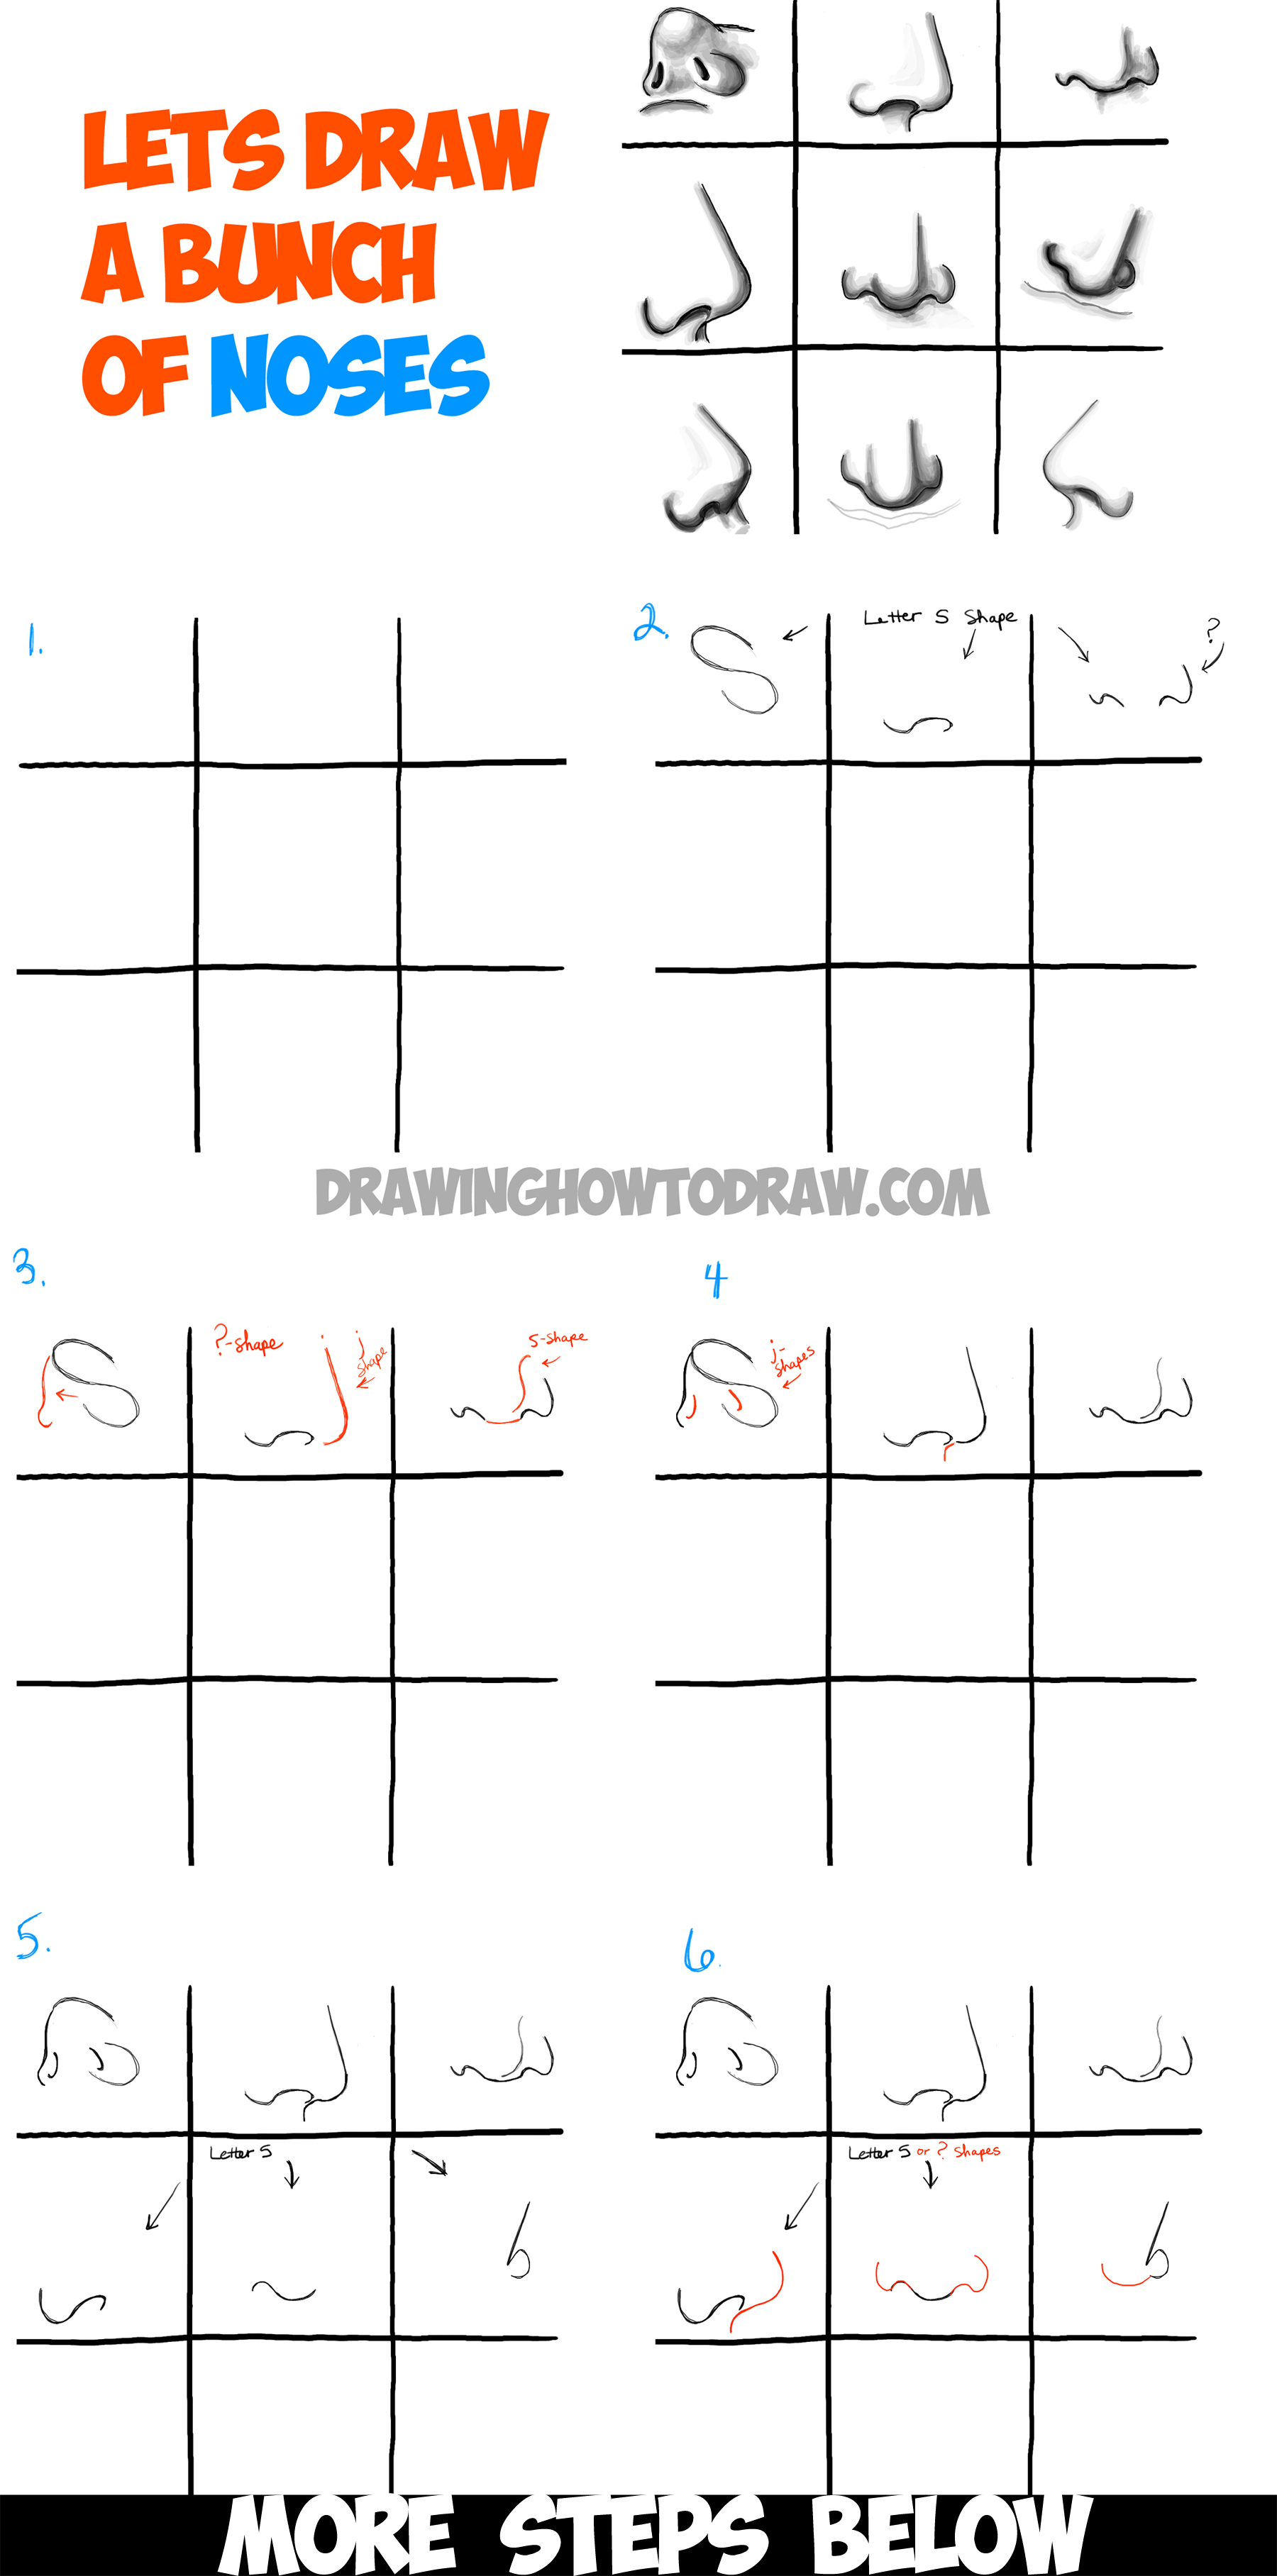 How to Draw Noses from All Different Angles and Positions - Step by Step Drawing Tutorial